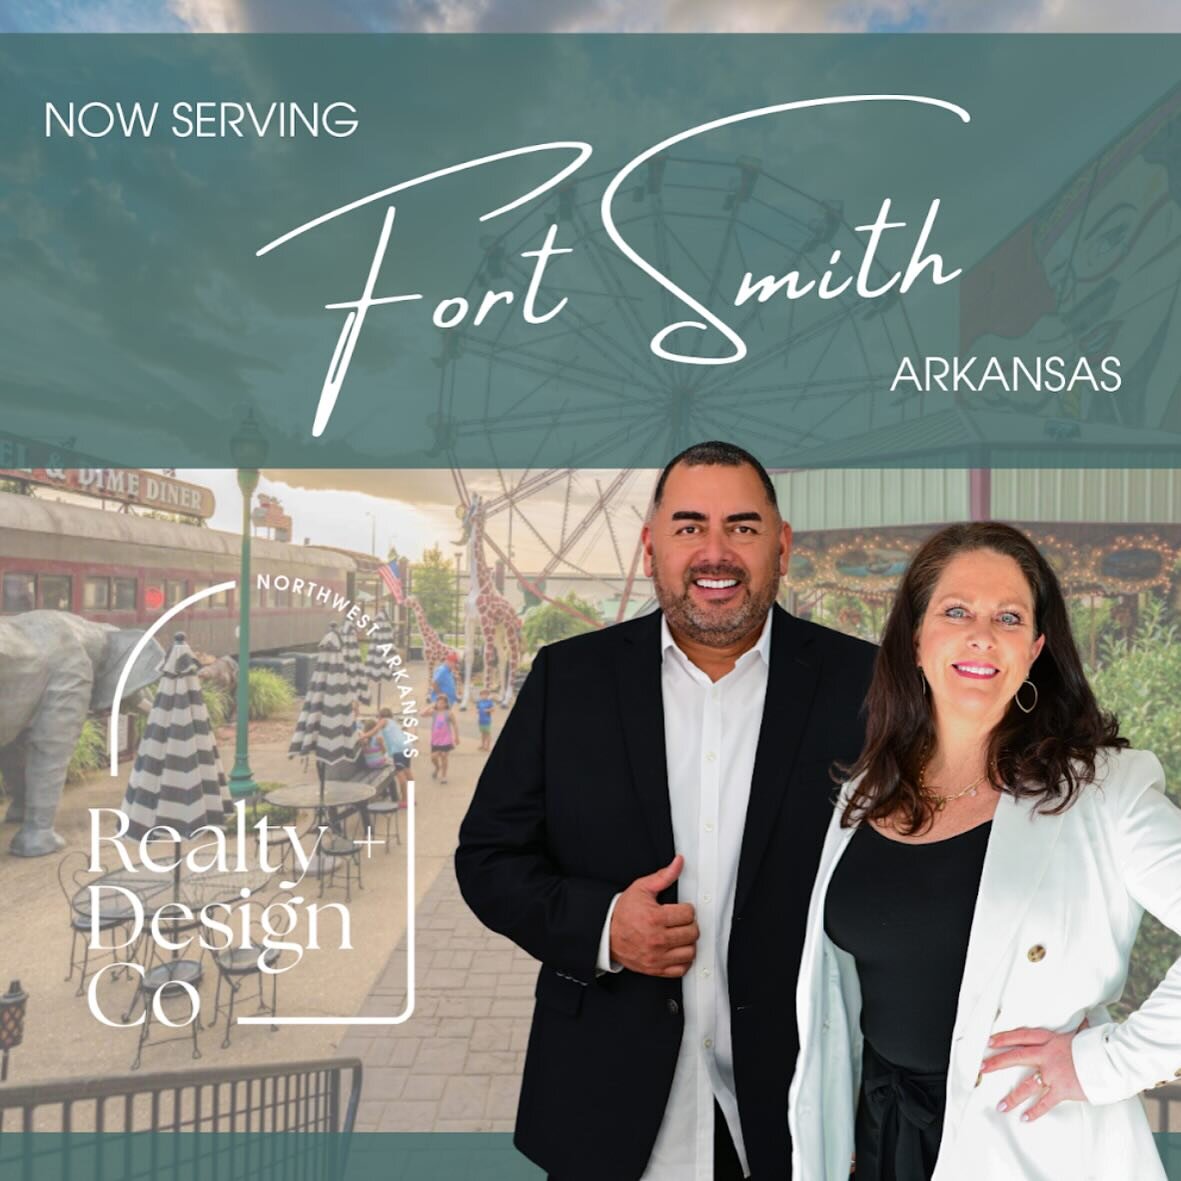 We are so excited to announce that we have expanded!!!! We now serve our outstanding real estate clients in the Fort Smith area as well as Northwest Arkansas👏🏽👏🏽👏🏽 Experience the ultimate service with our Principal Broker, David Cisneros, and R